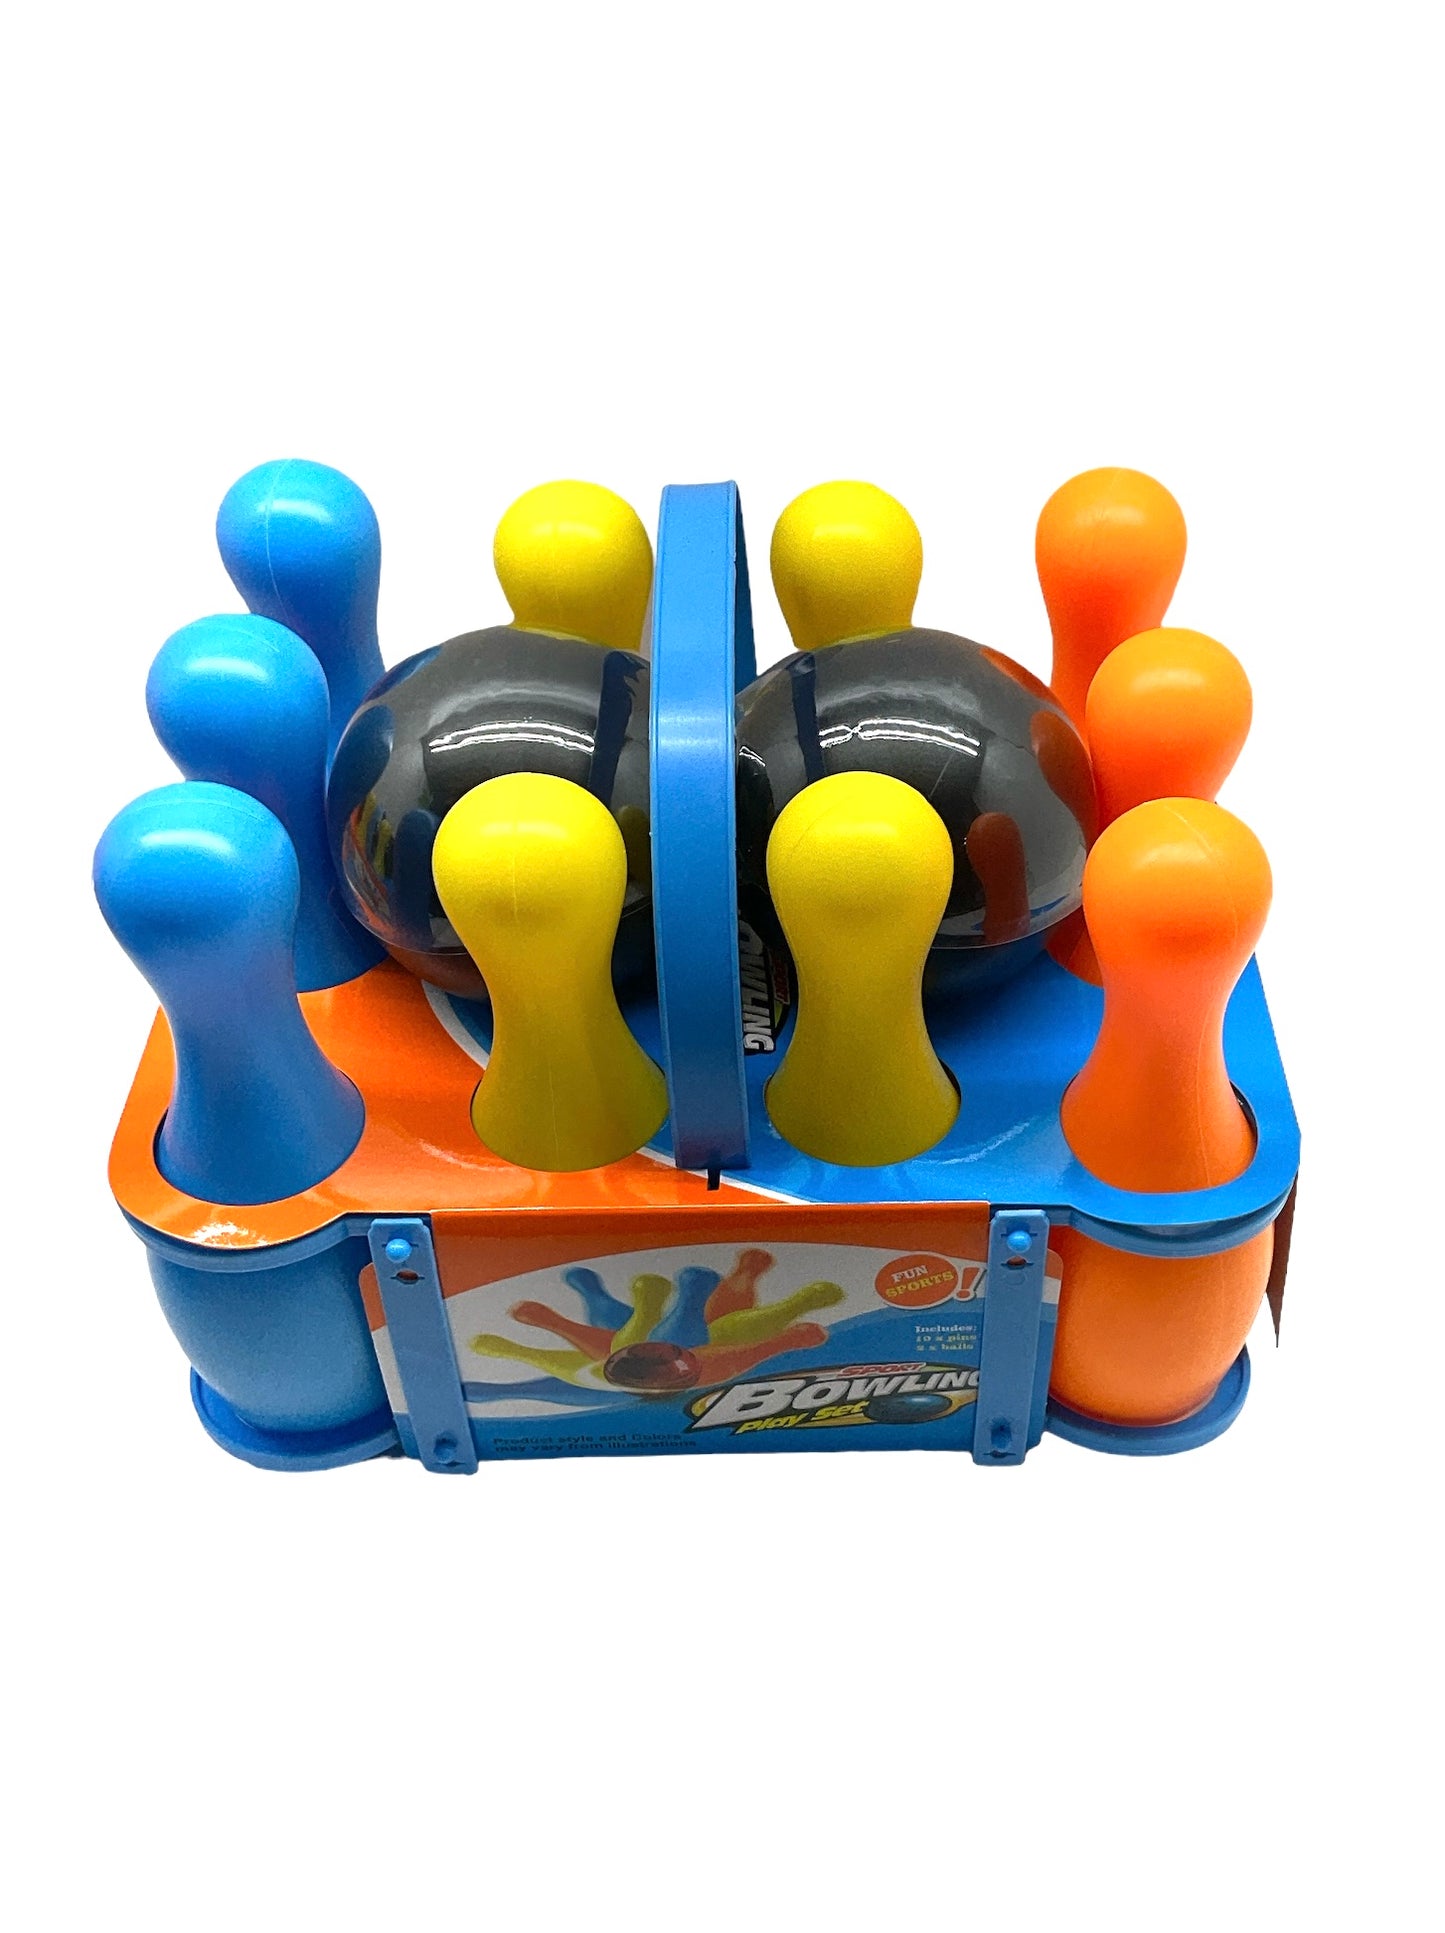 Bowling Play Set Case of 2